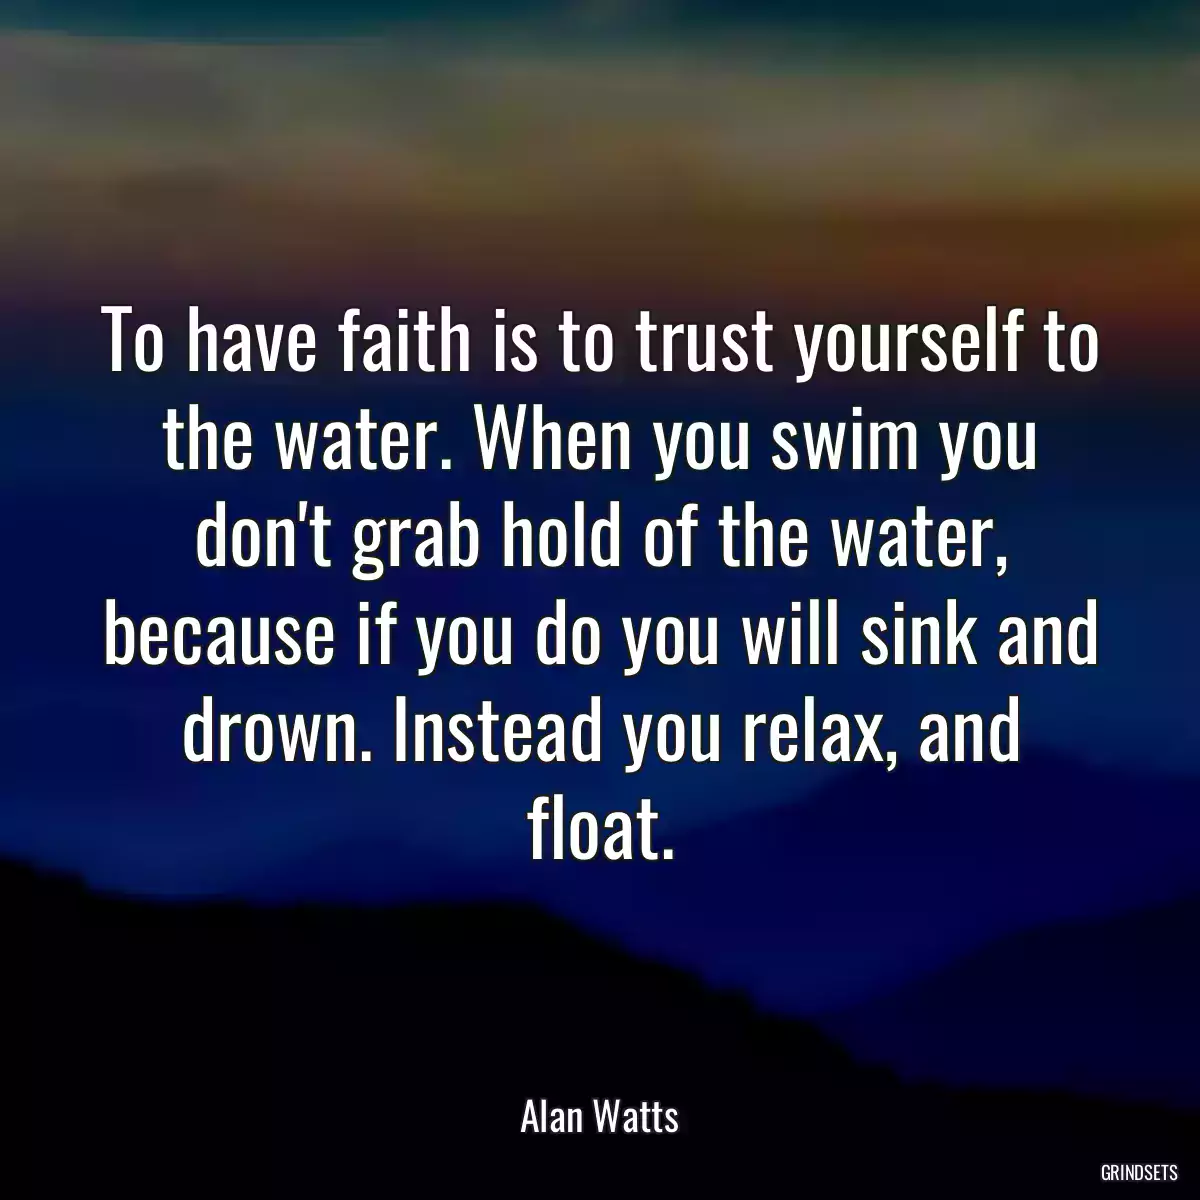 To have faith is to trust yourself to the water. When you swim you don\'t grab hold of the water, because if you do you will sink and drown. Instead you relax, and float.